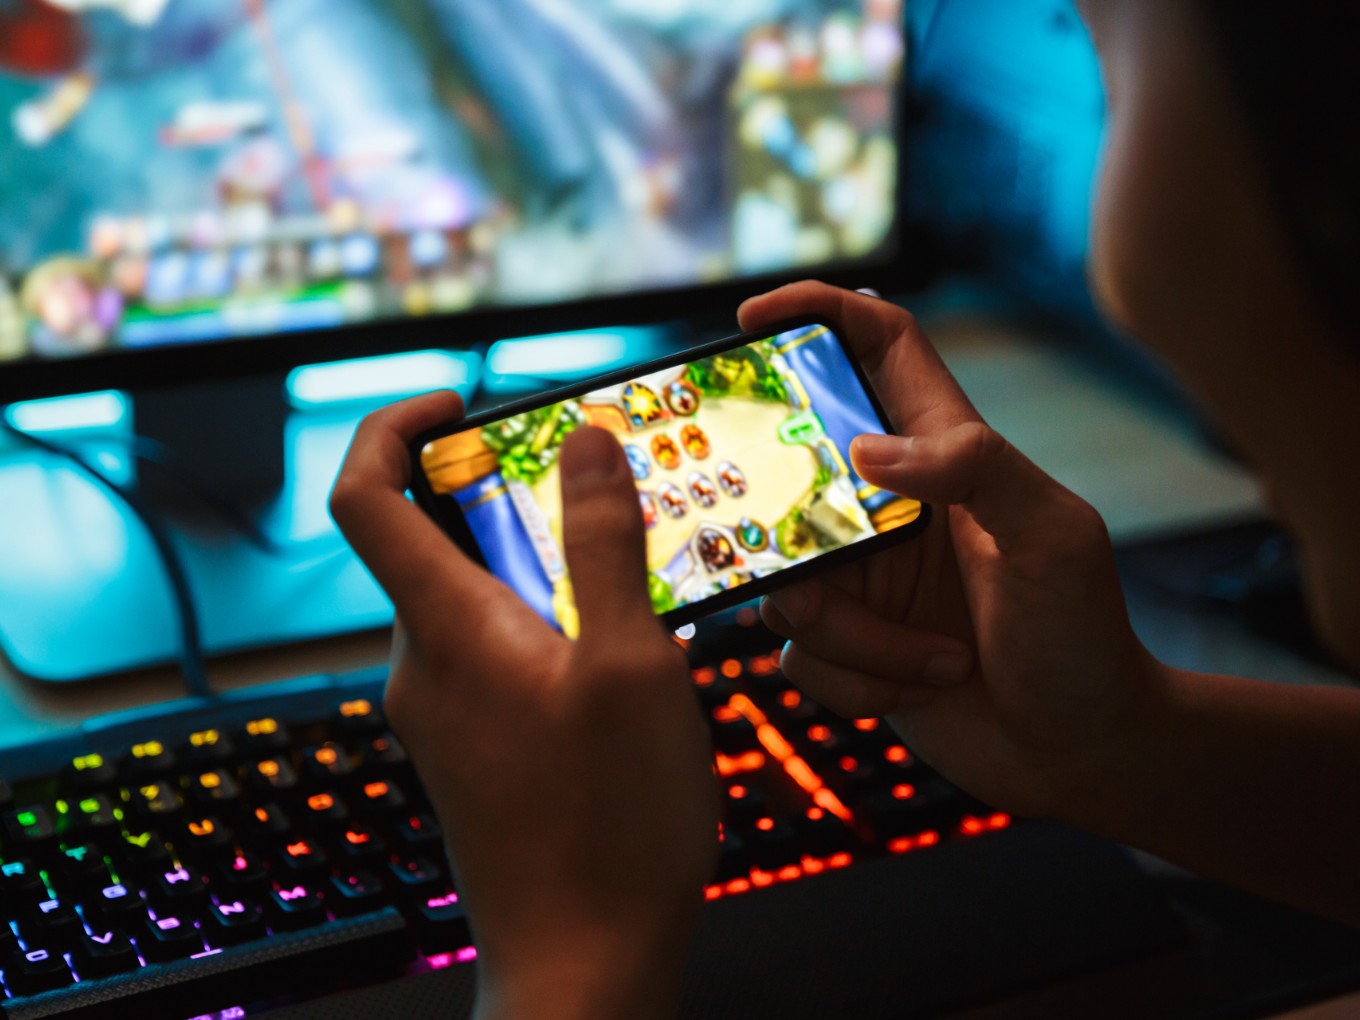 Online Gaming: Is this a problem for my child? - Cyber Safety